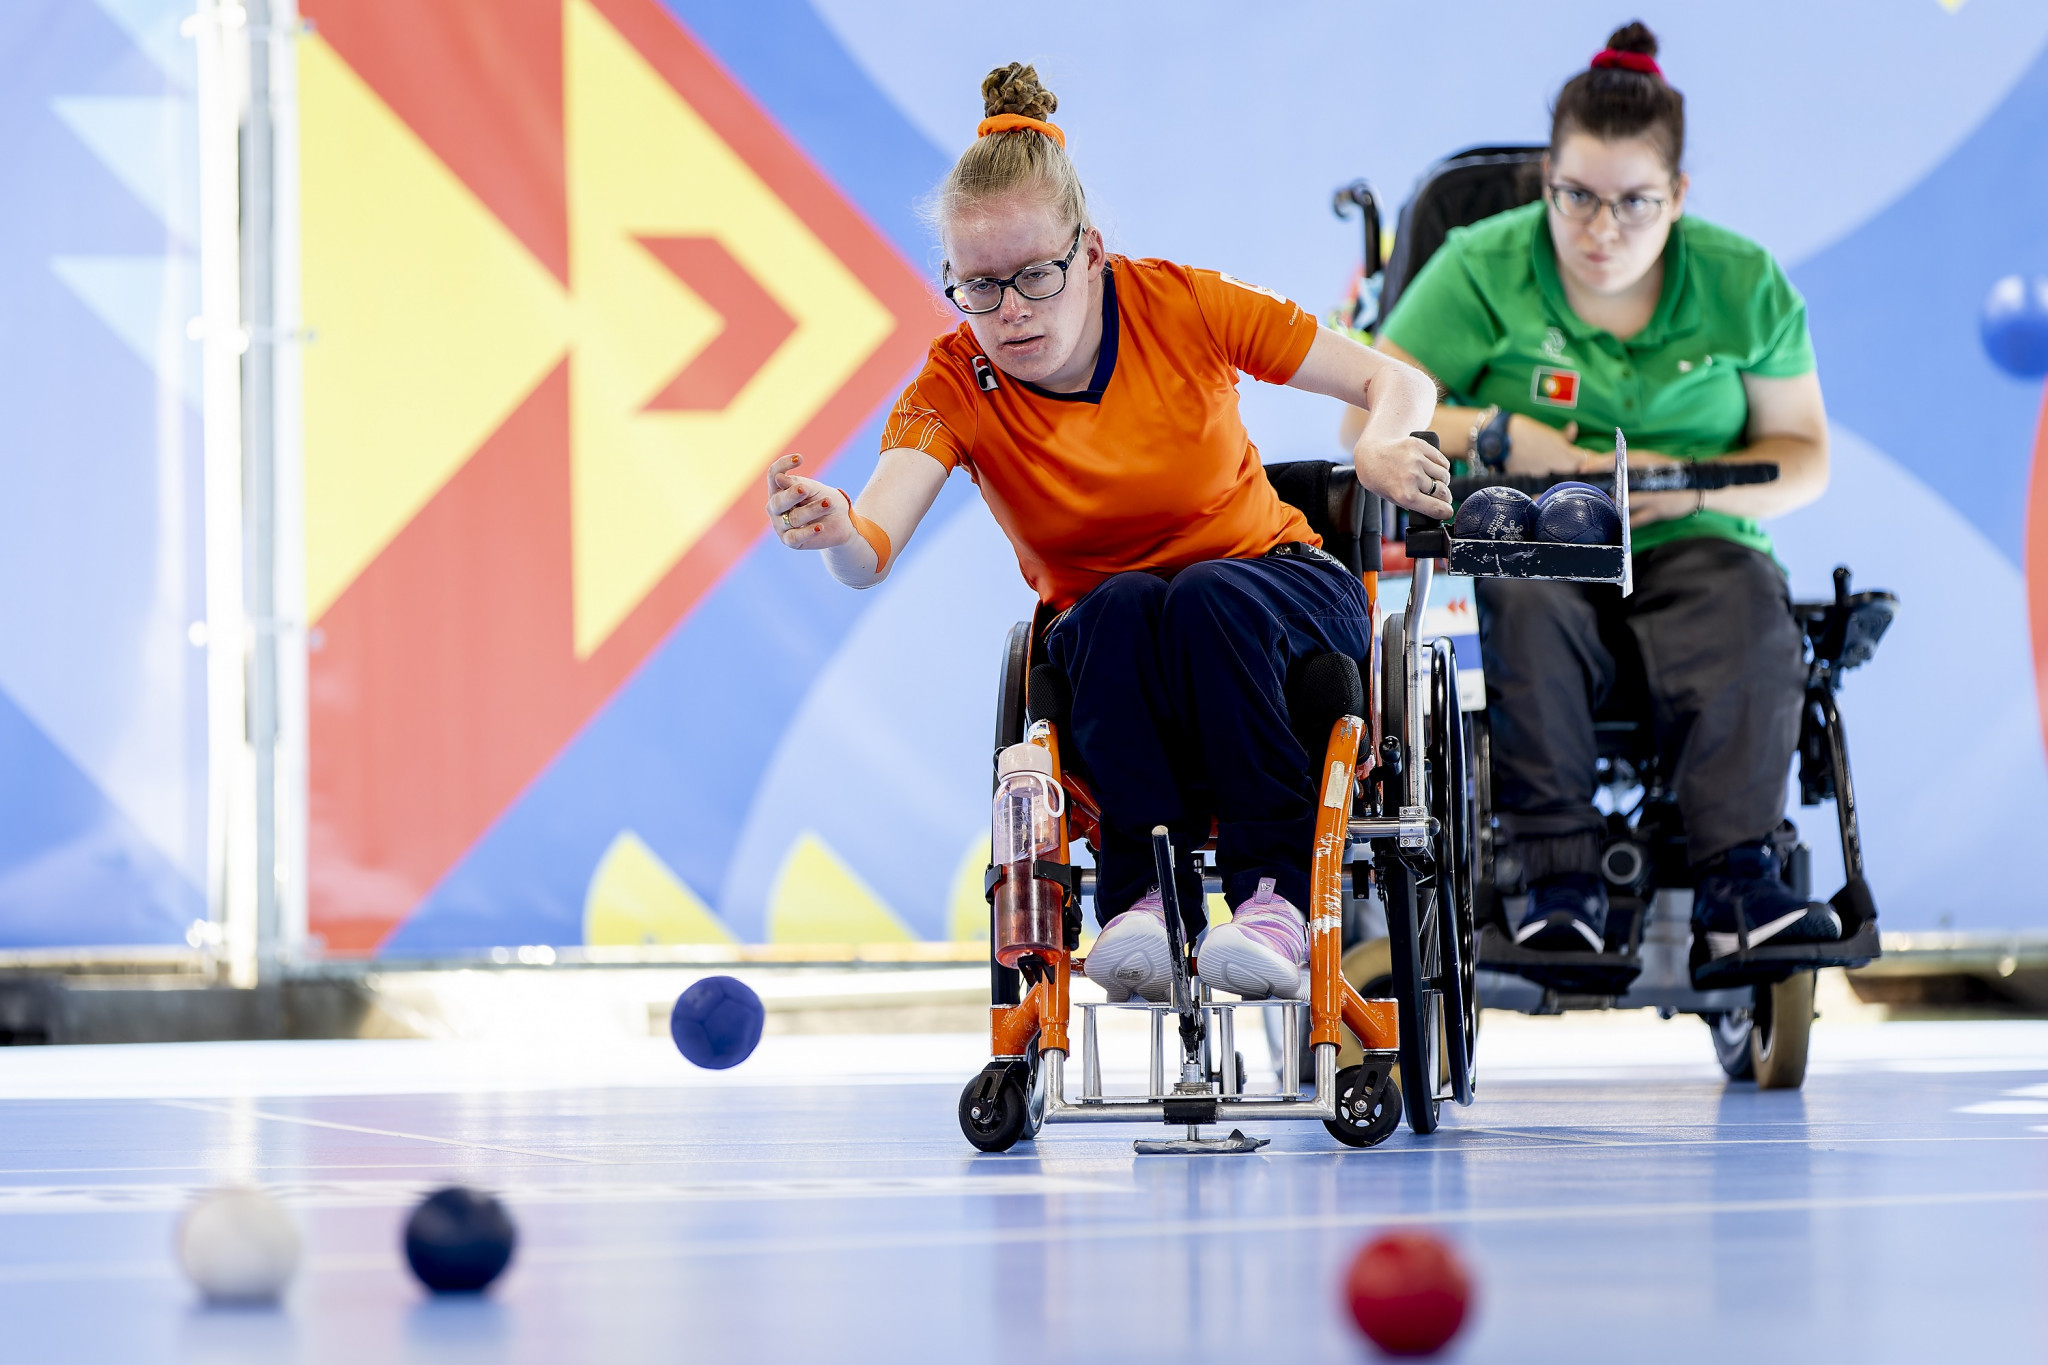 Chantal van Engelen of The Netherlands overcame Portugal’s Anna Correia in the women’s BC2 final ©EPC